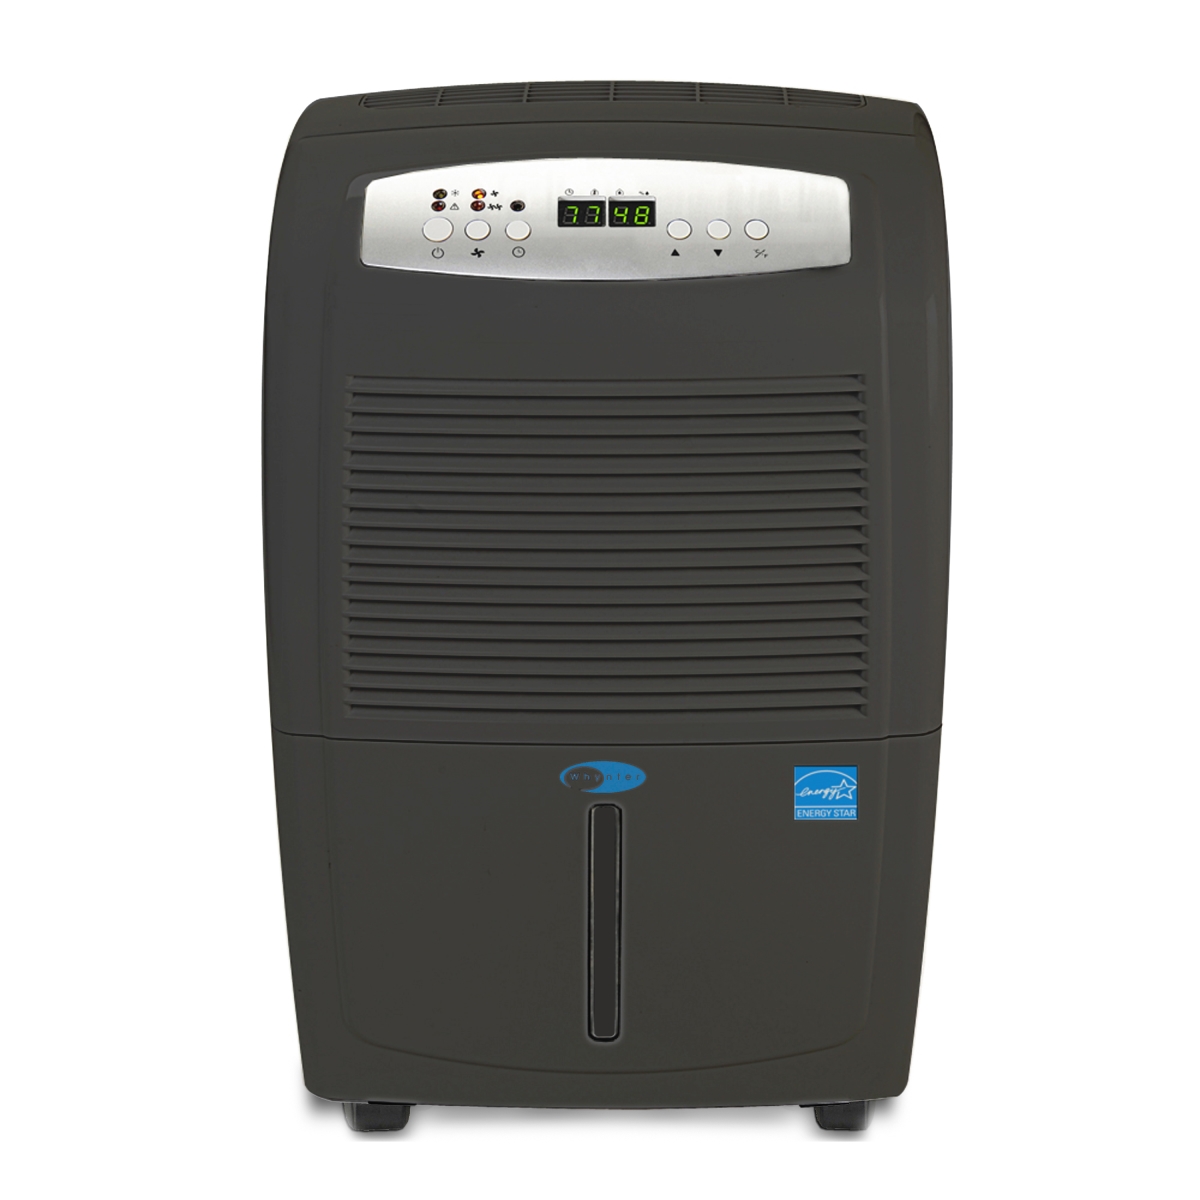 Picture of Whynter RPD-561EGP Energy Star 50 Pint High Capacity Portable Dehumidifier with Pump, Grey for Up to 4000 sq ft